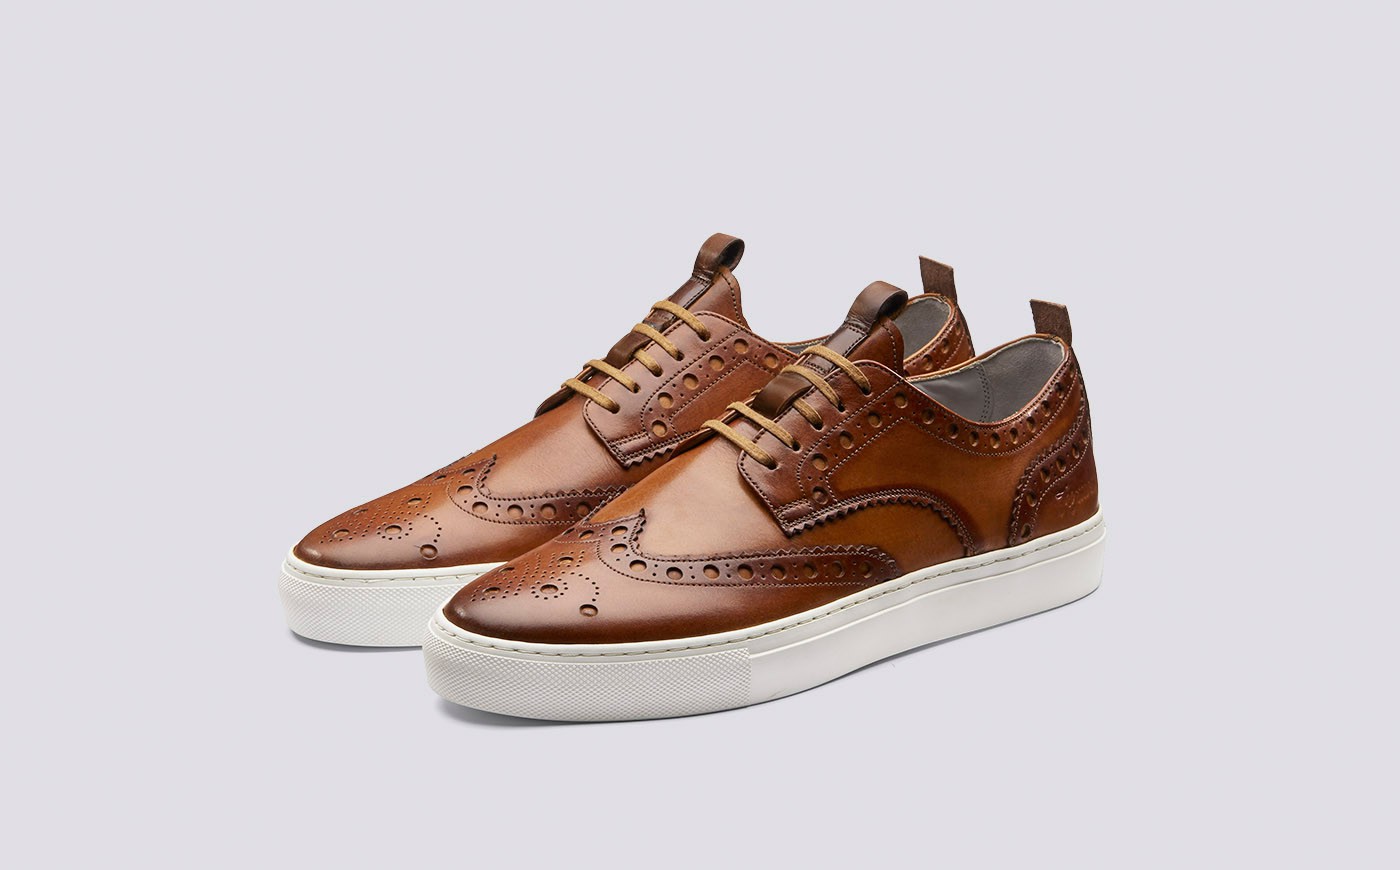 111453_-_sneaker_3_-_tan_hand_painted_calf_leather_-_brogue_sneaker_-_white_rubber_sole_-_3_quarter.jpg